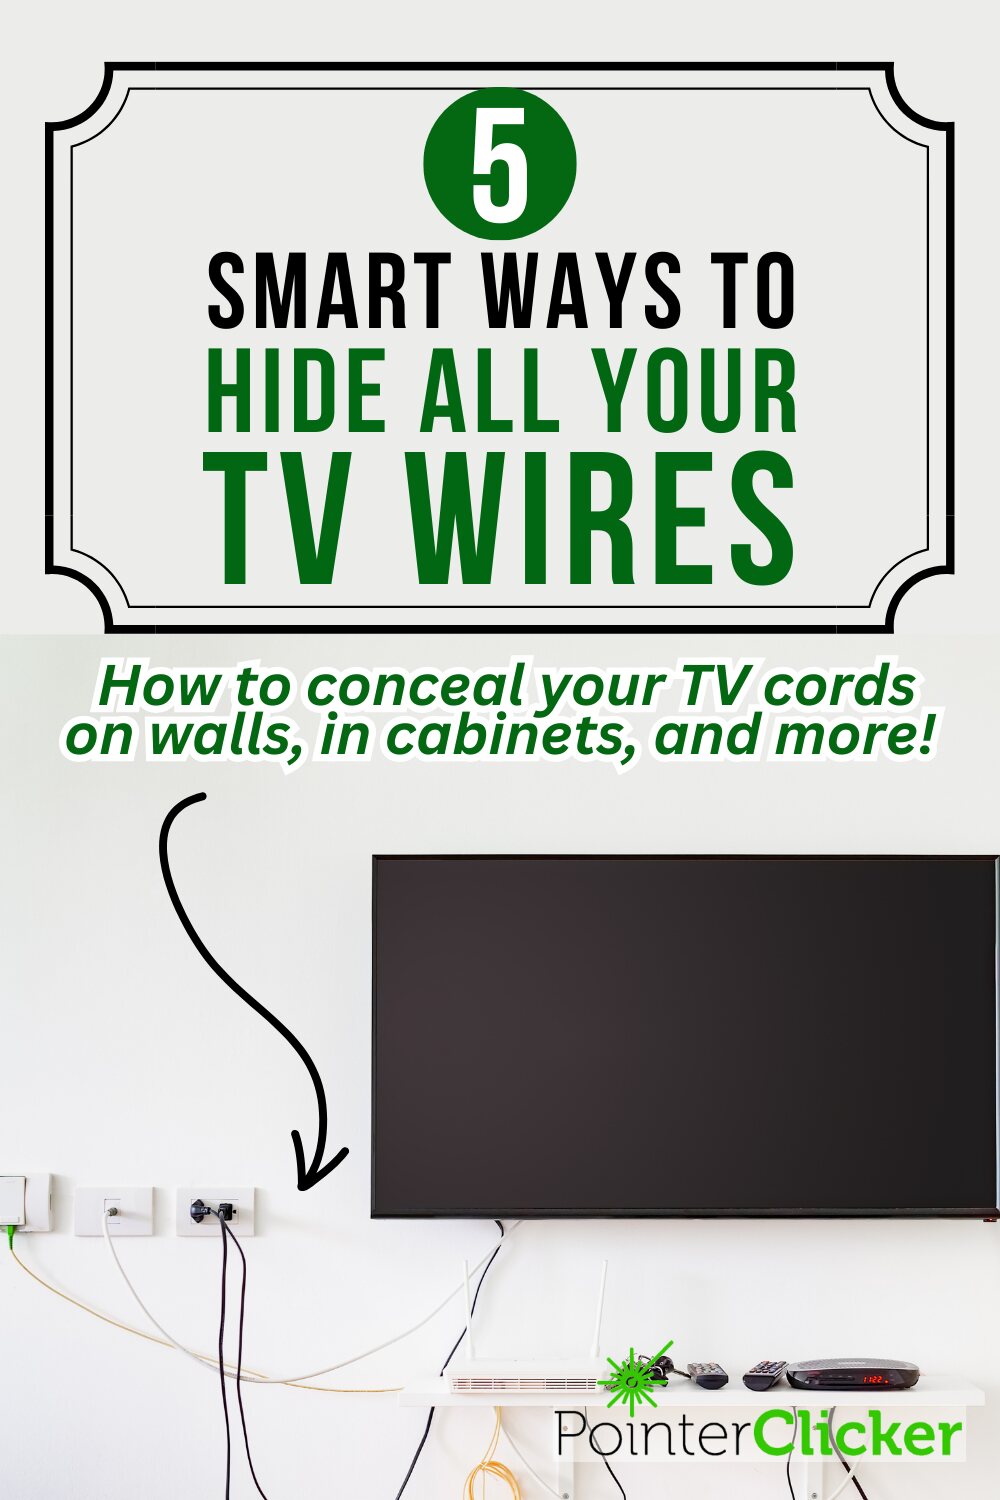 5 smart ways to hide your TV wires - how to conceal your TV cords on walls, in cabinets, and more